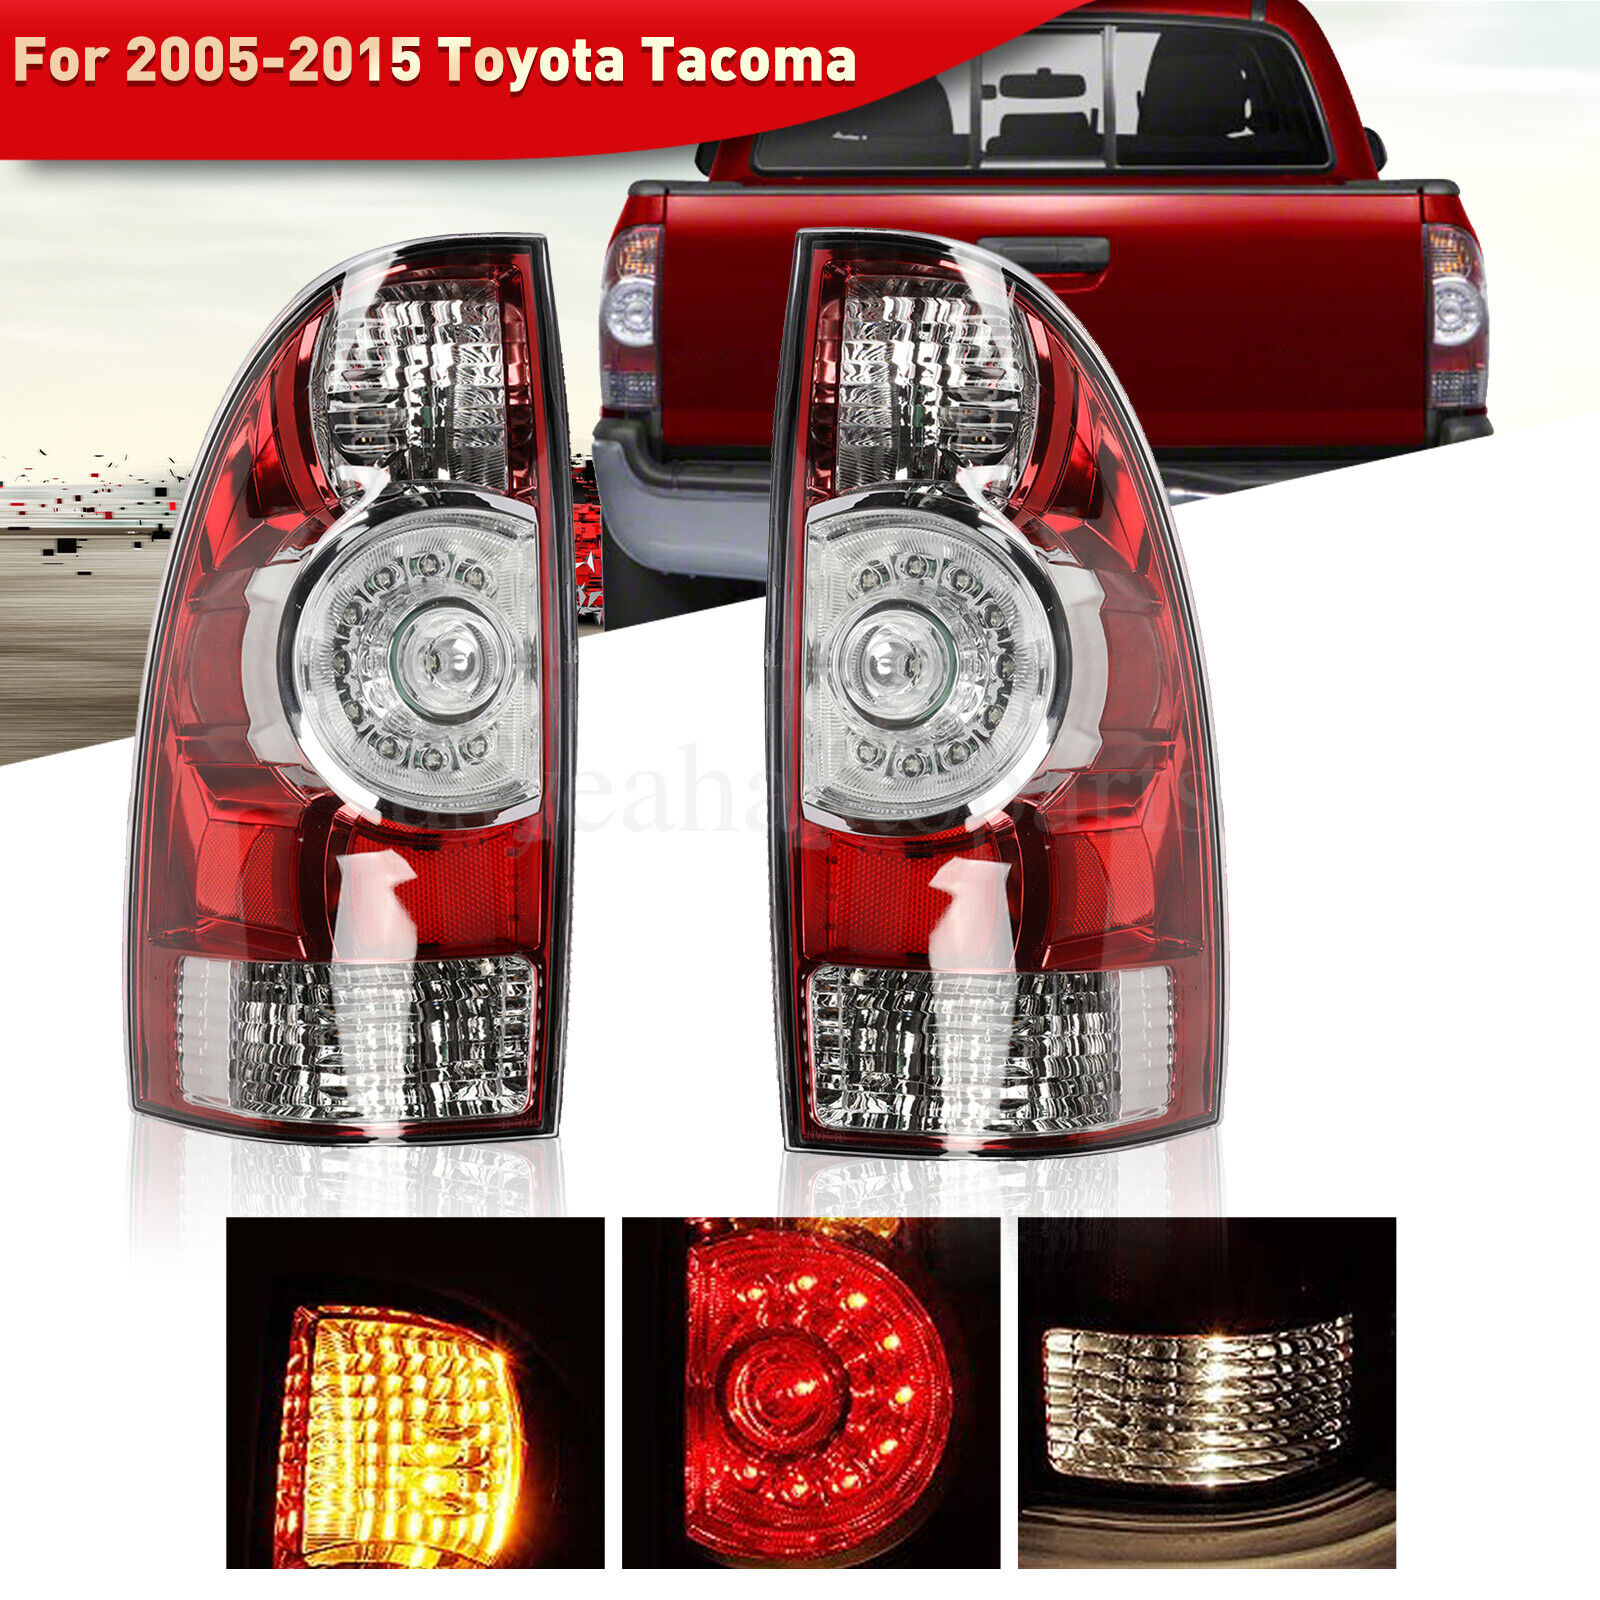 For 2005-2015 TACOMA LEFT & RIGHT Replacement LED Tail Lights